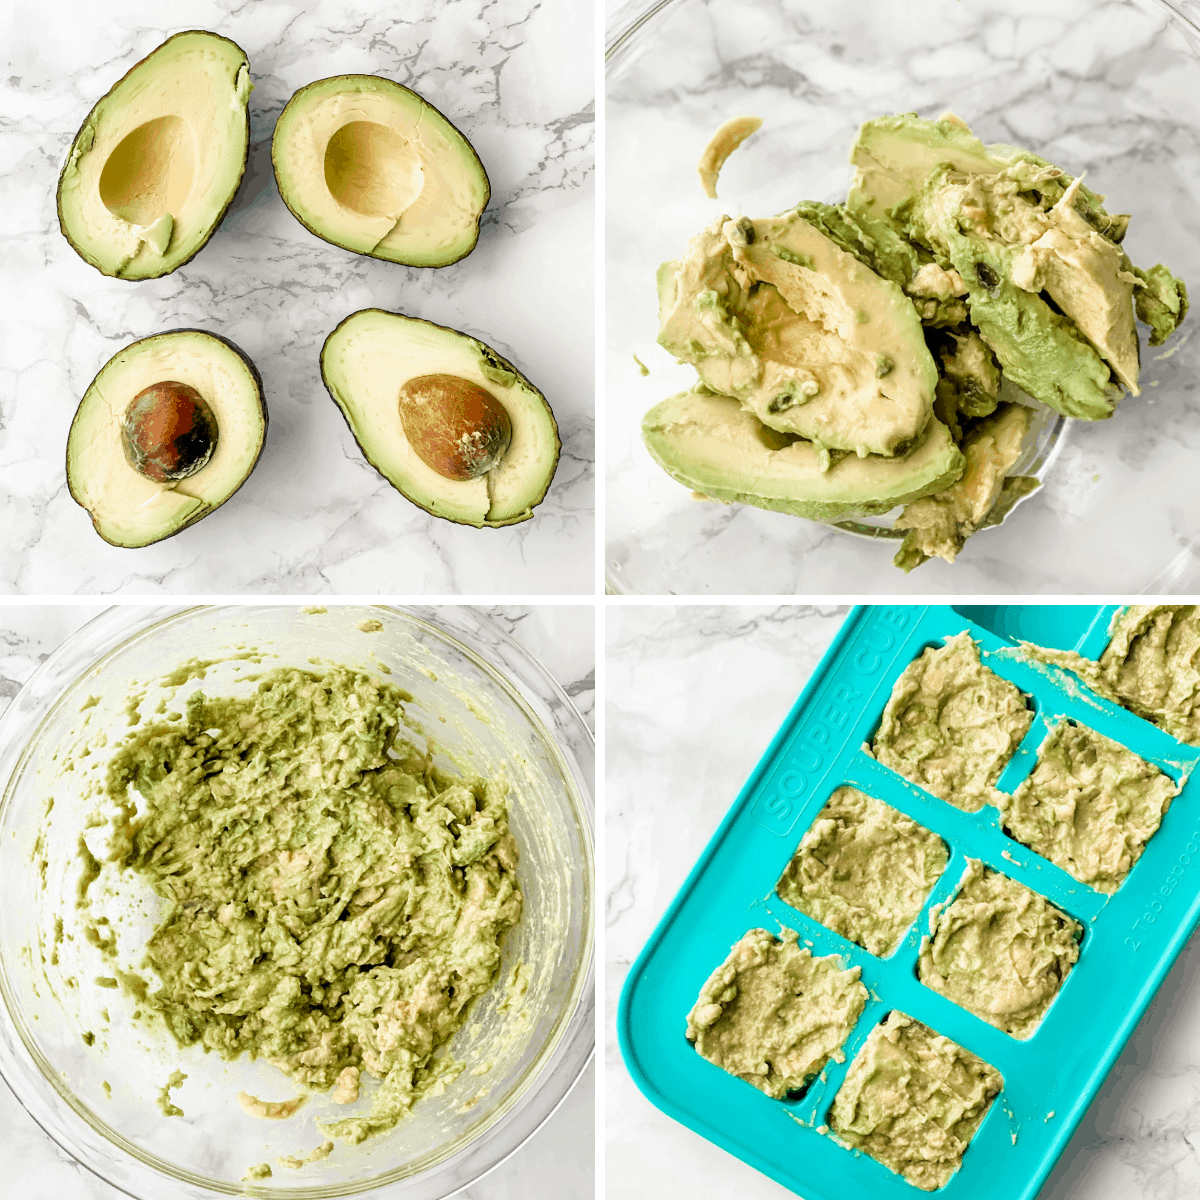 Step by step how to freeze avocado mash using a silicone tray.